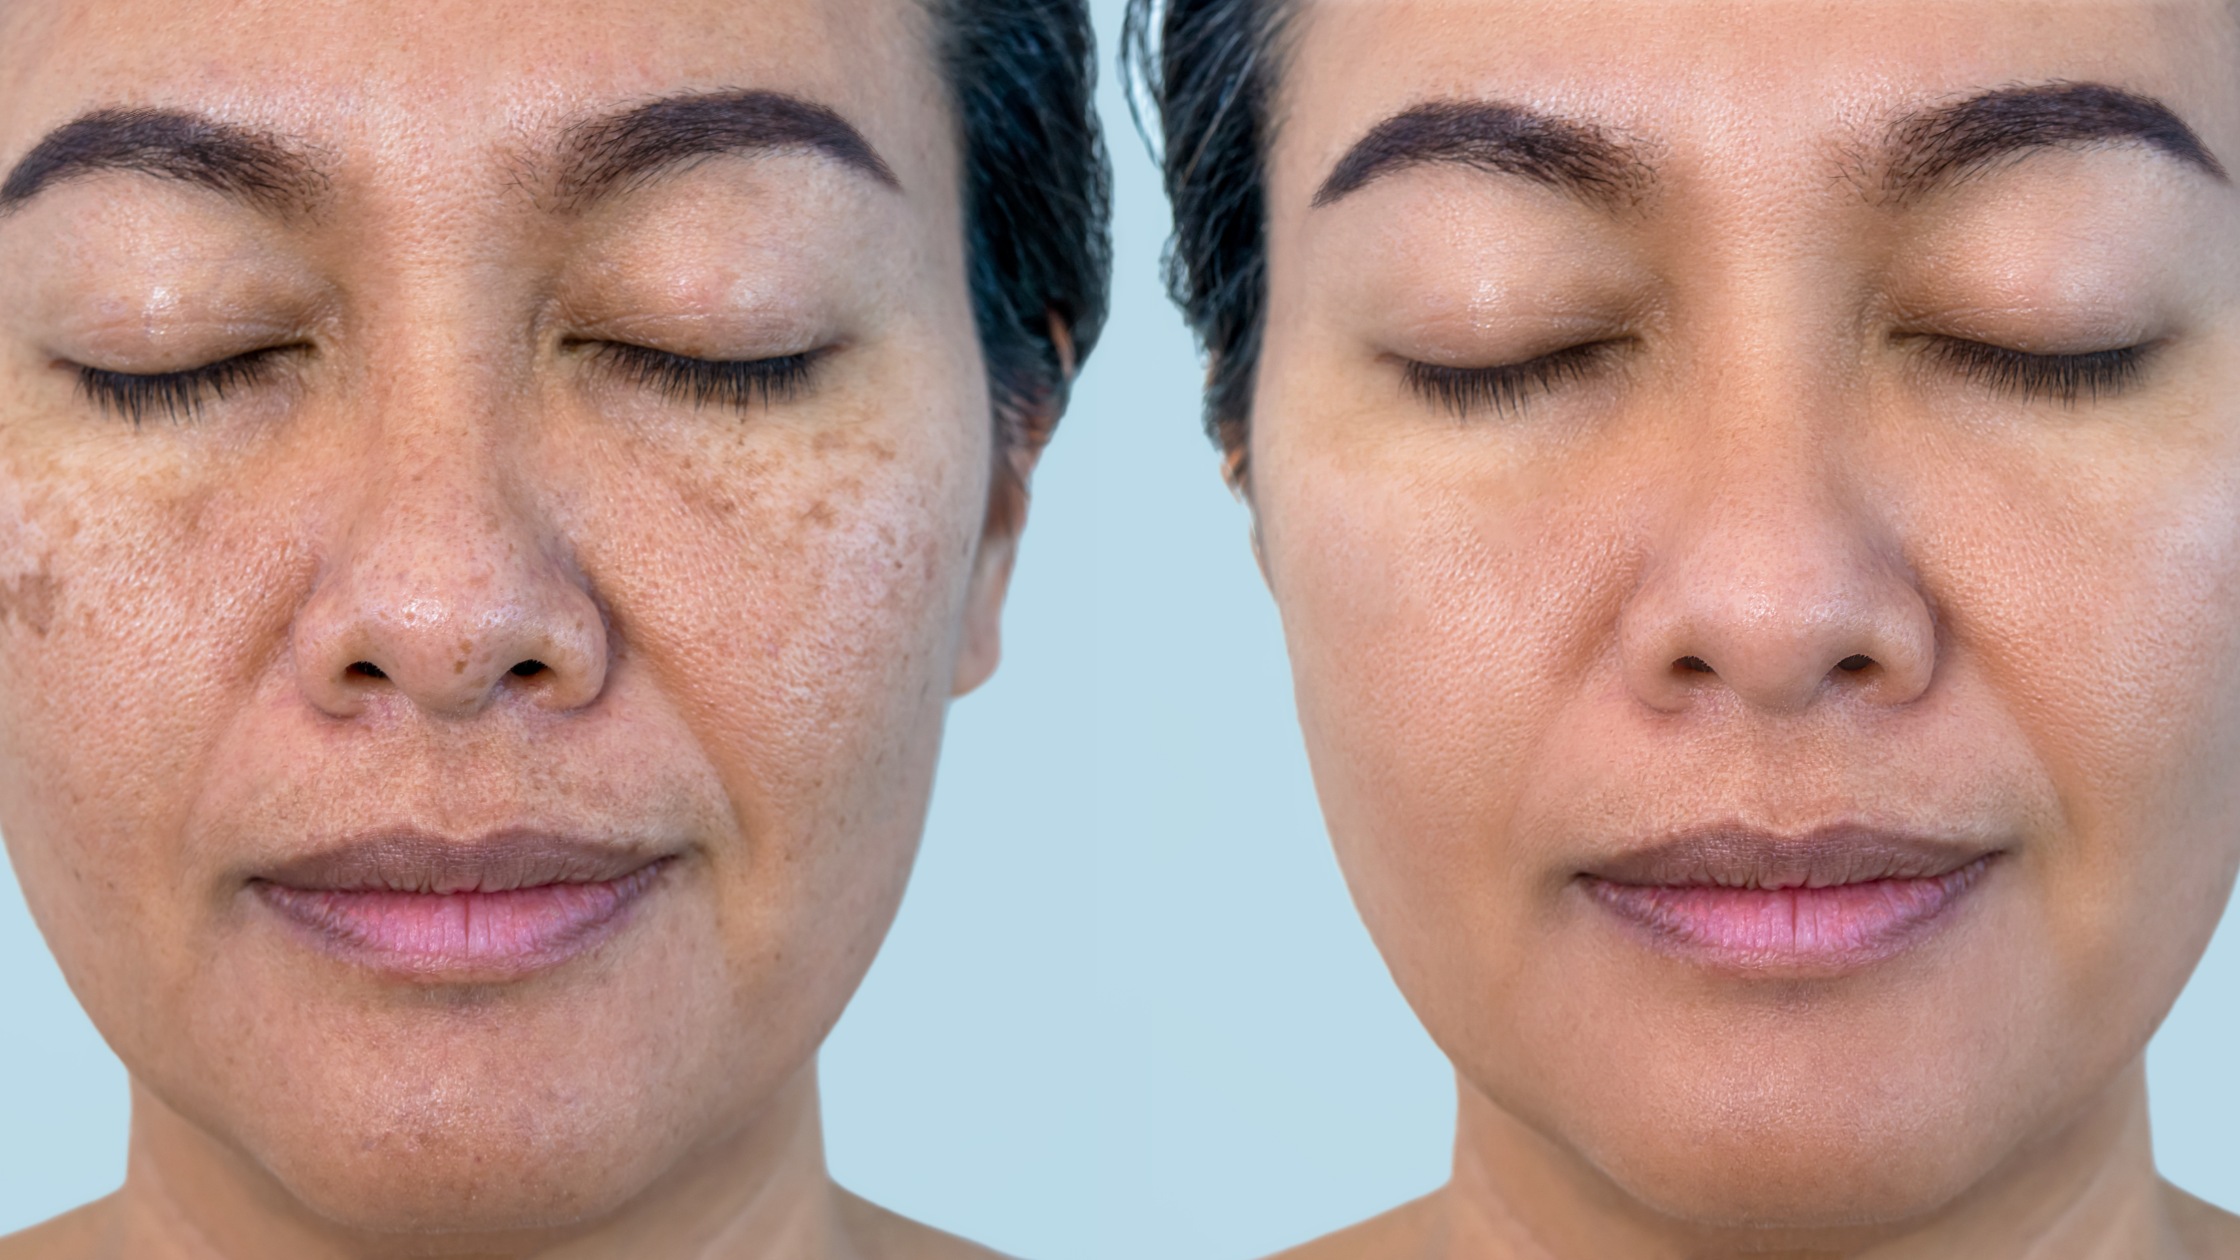 What is Melasma and why is it hard to treat?